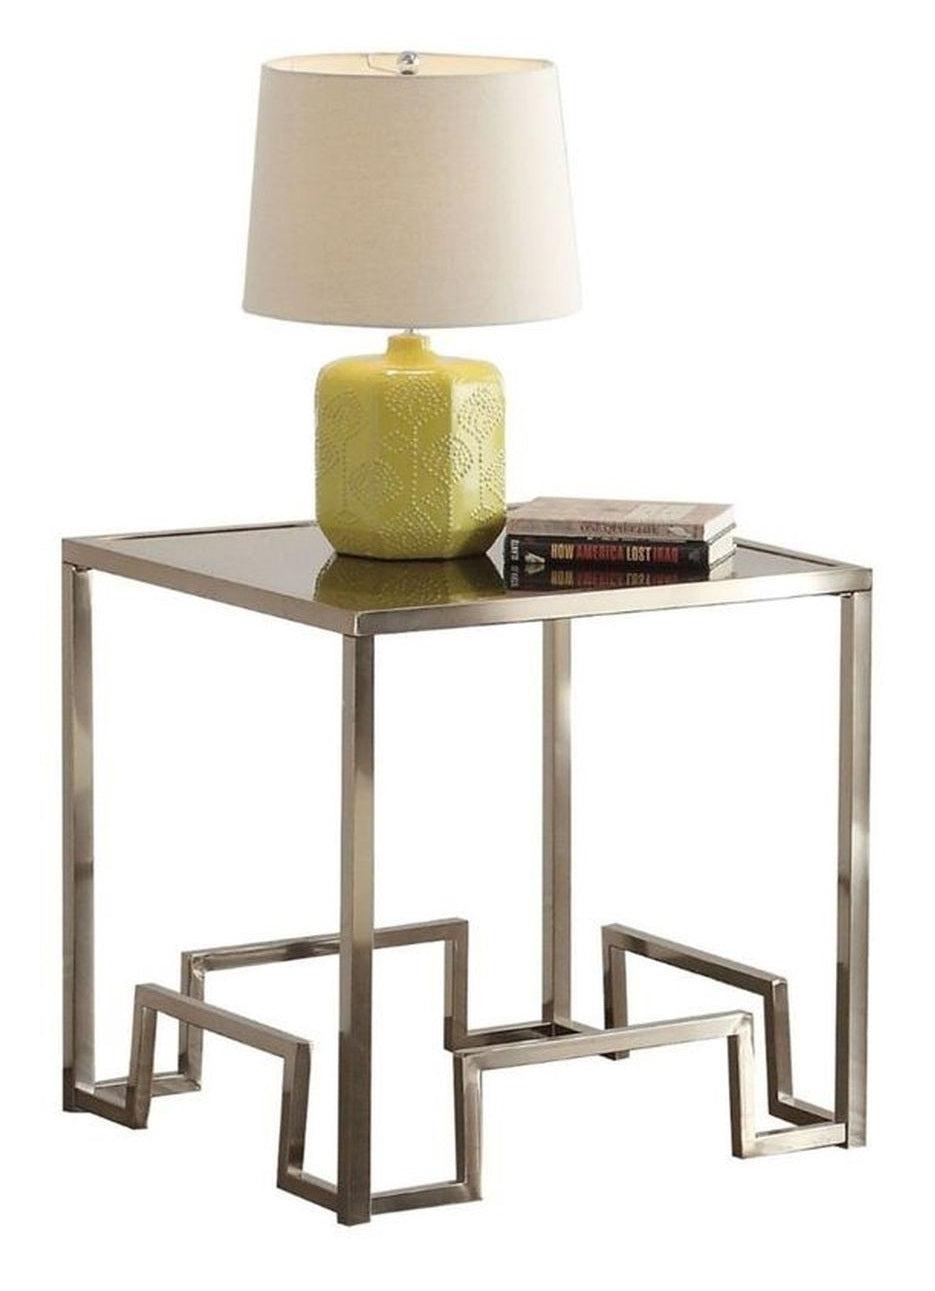 Acme Damien End Table in Champagne 81627  Las Vegas Furniture Stores